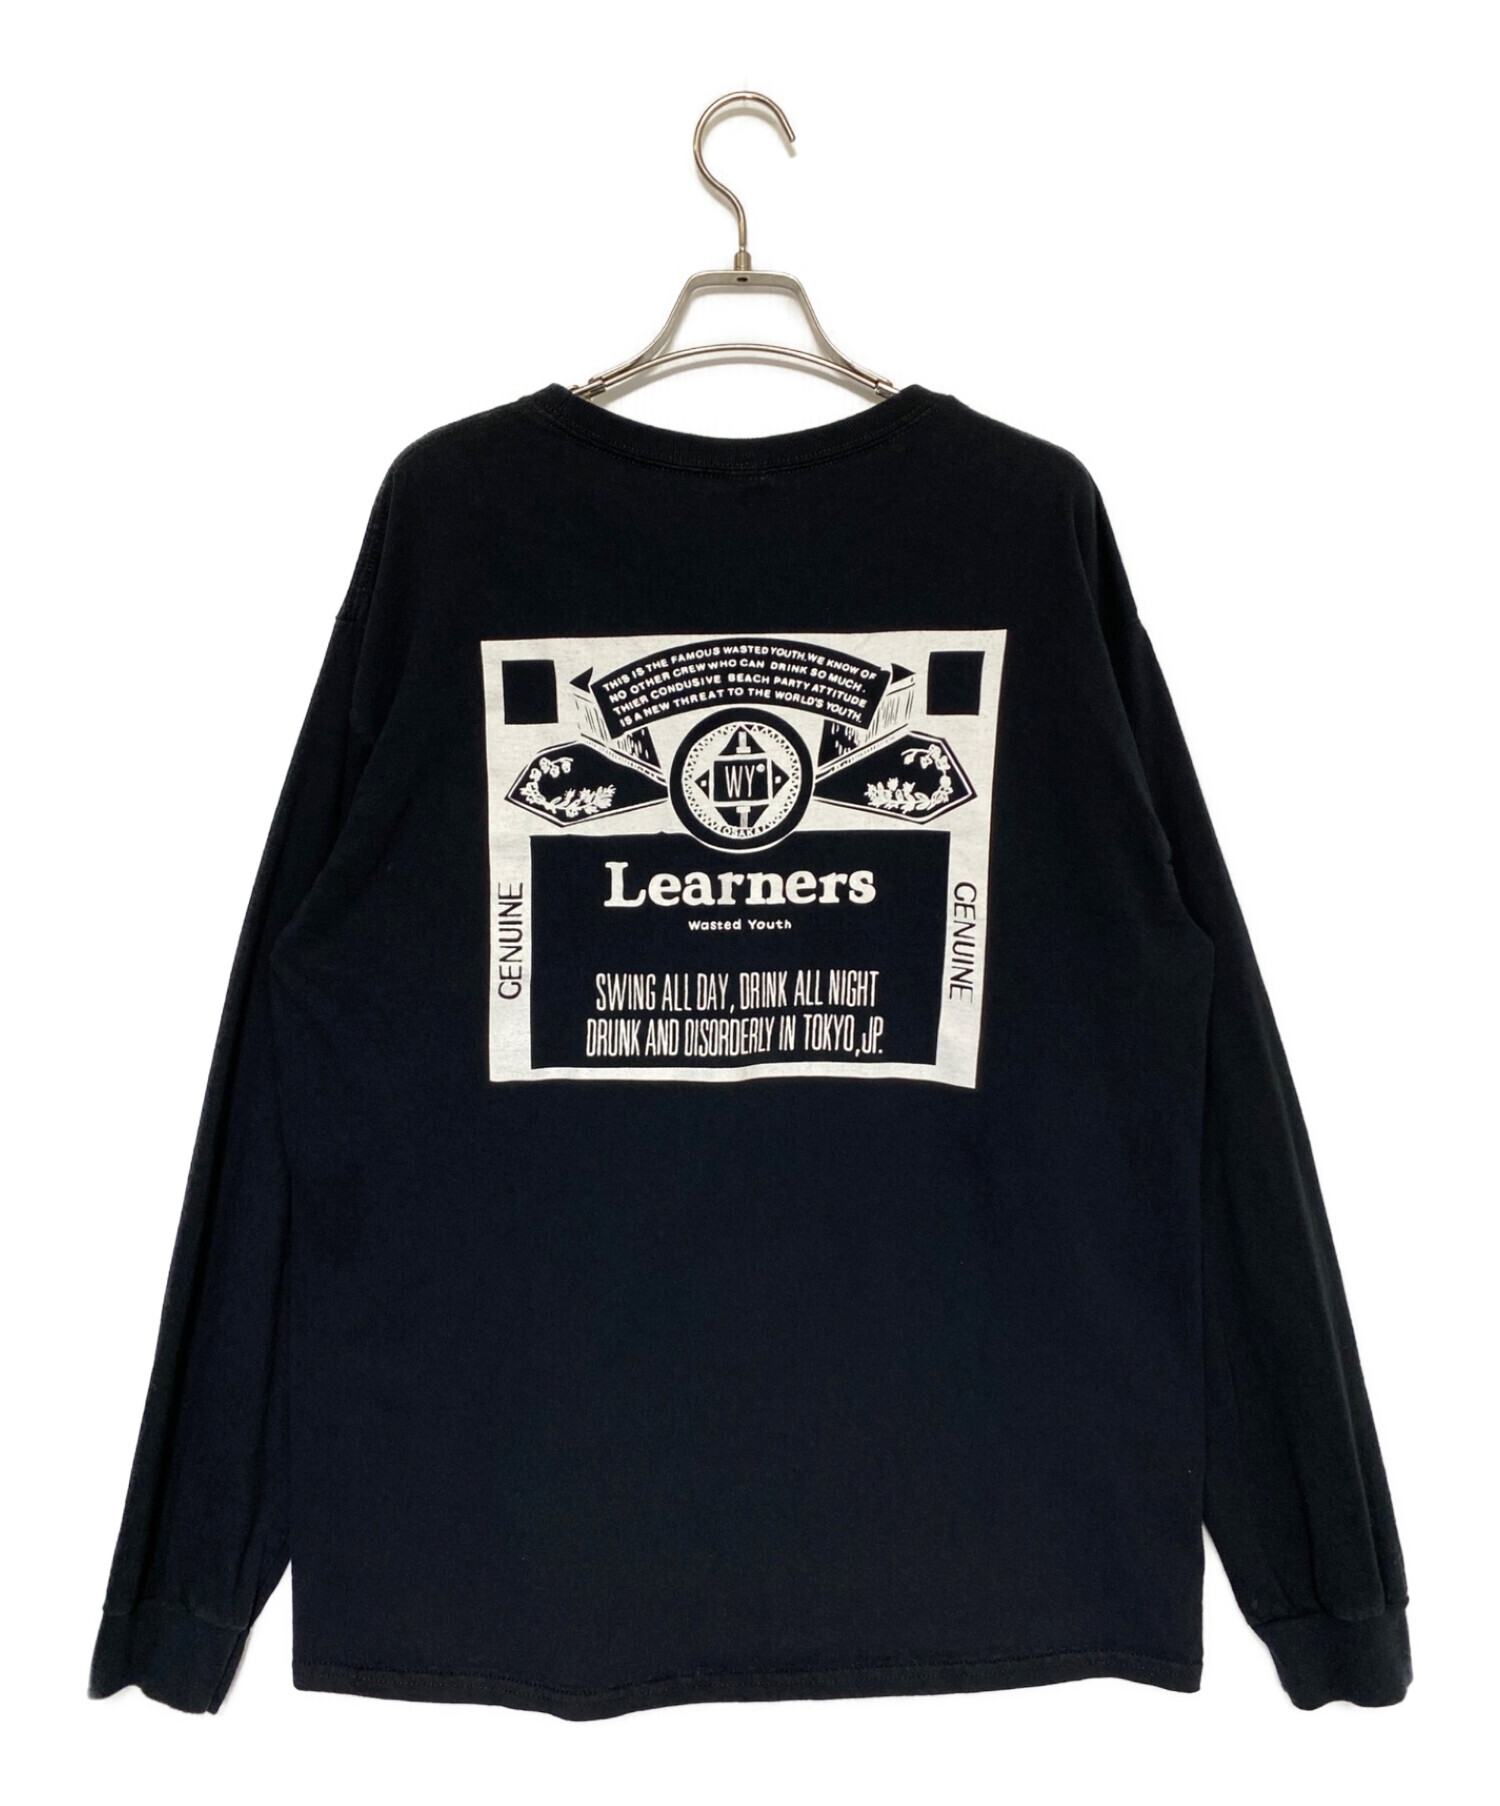 wasted youth × Learners Tシャツ - Tシャツ/カットソー(半袖/袖なし)